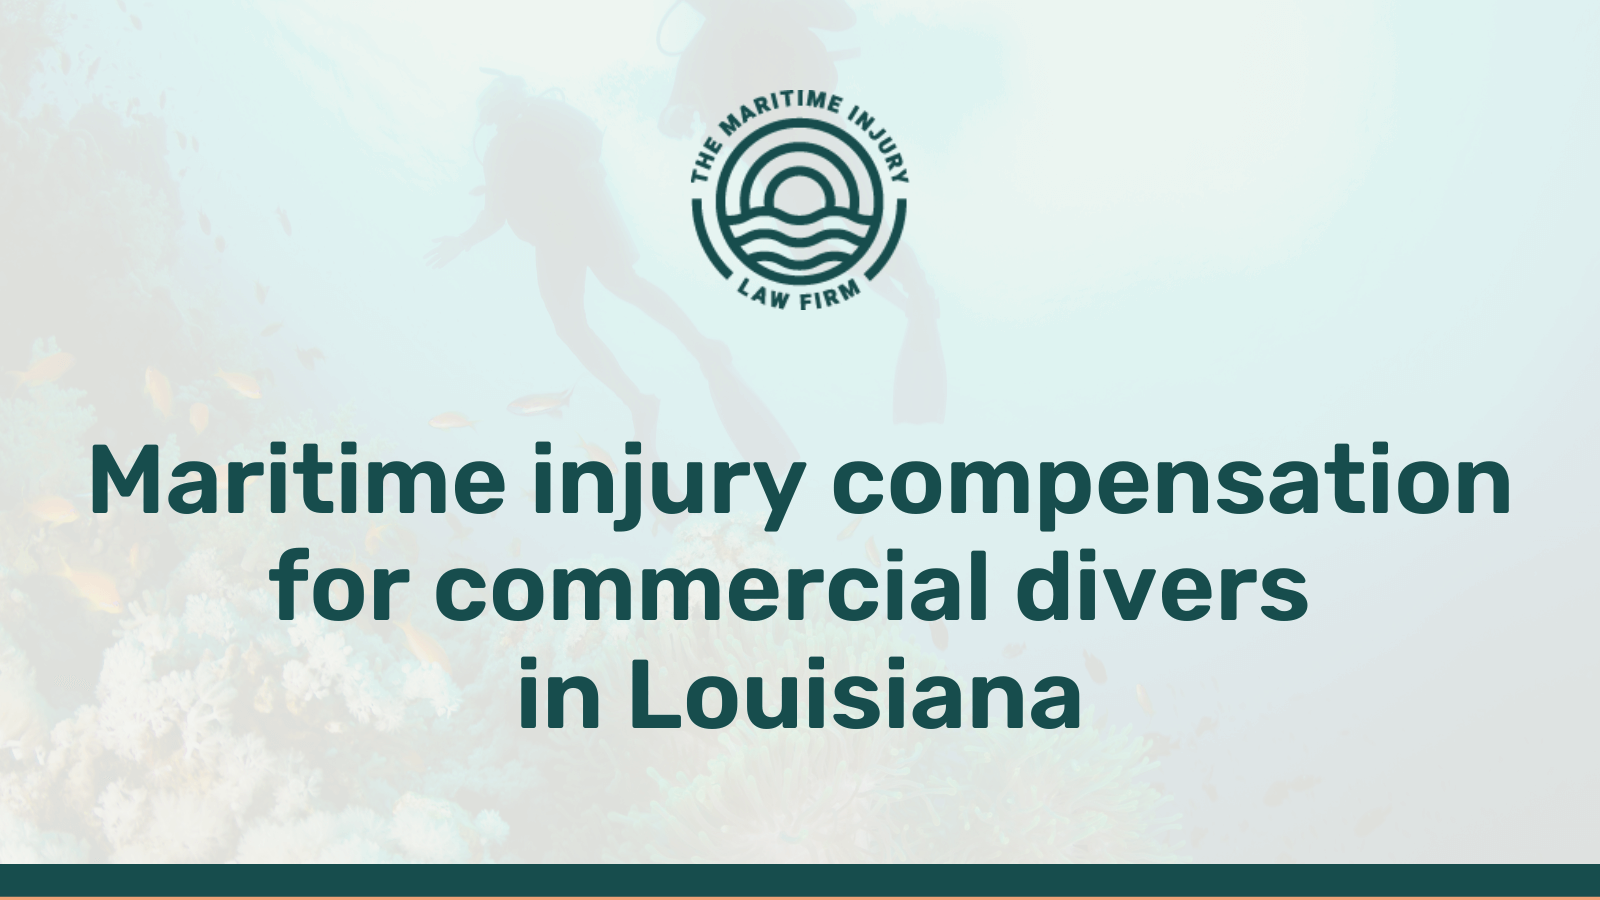 Maritime injury compensation for commercial divers in Louisiana - maritime injury law firm - George Vourvoulias